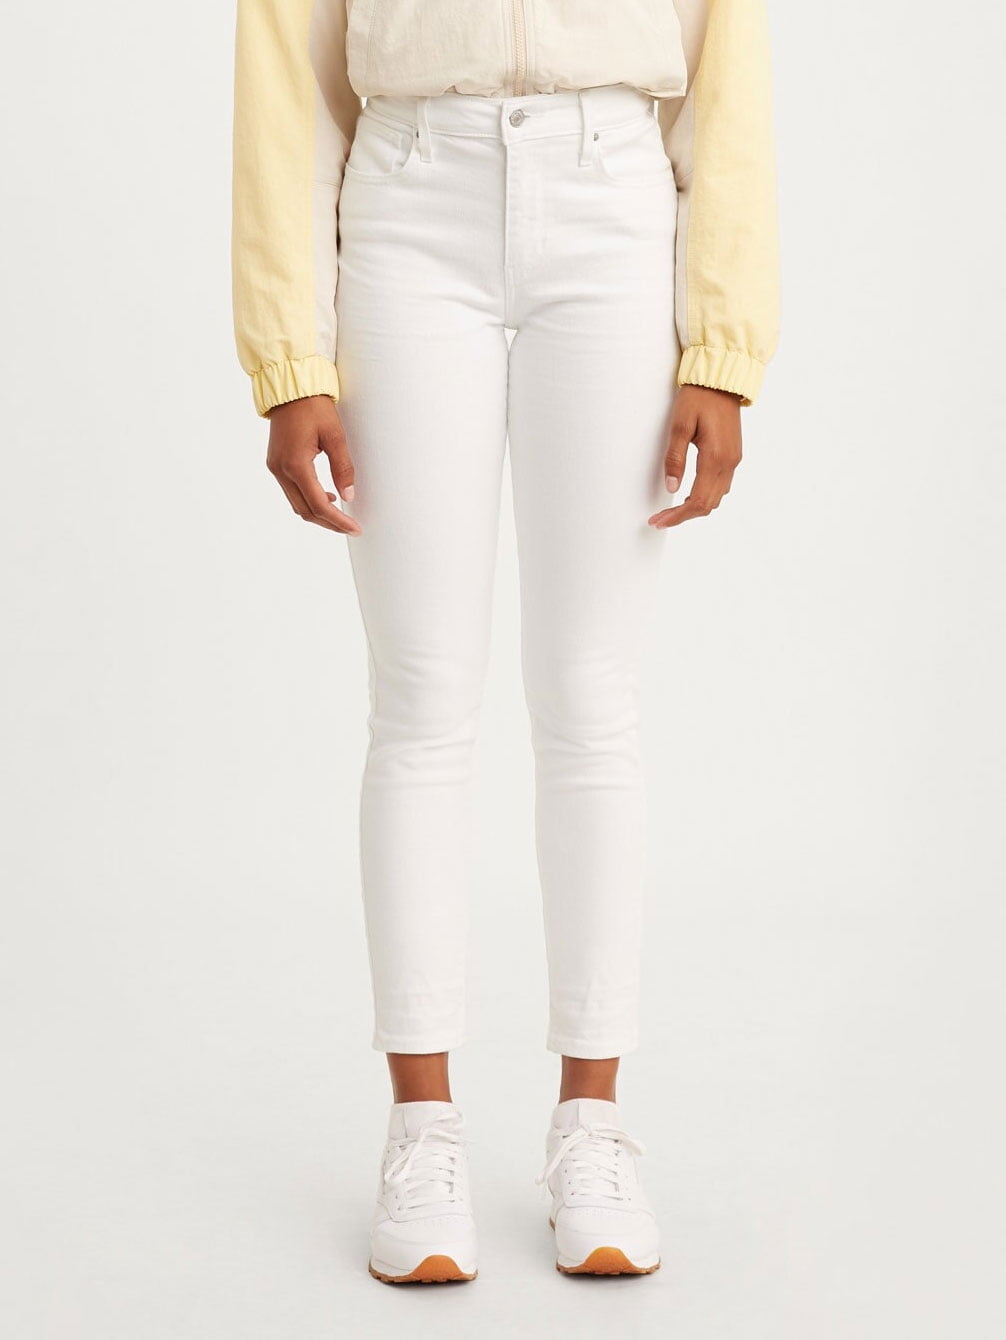 Levi's 721 Misses High Rise Skinny Jeans - Soft Clean White, Soft Clean  White, 27X30 